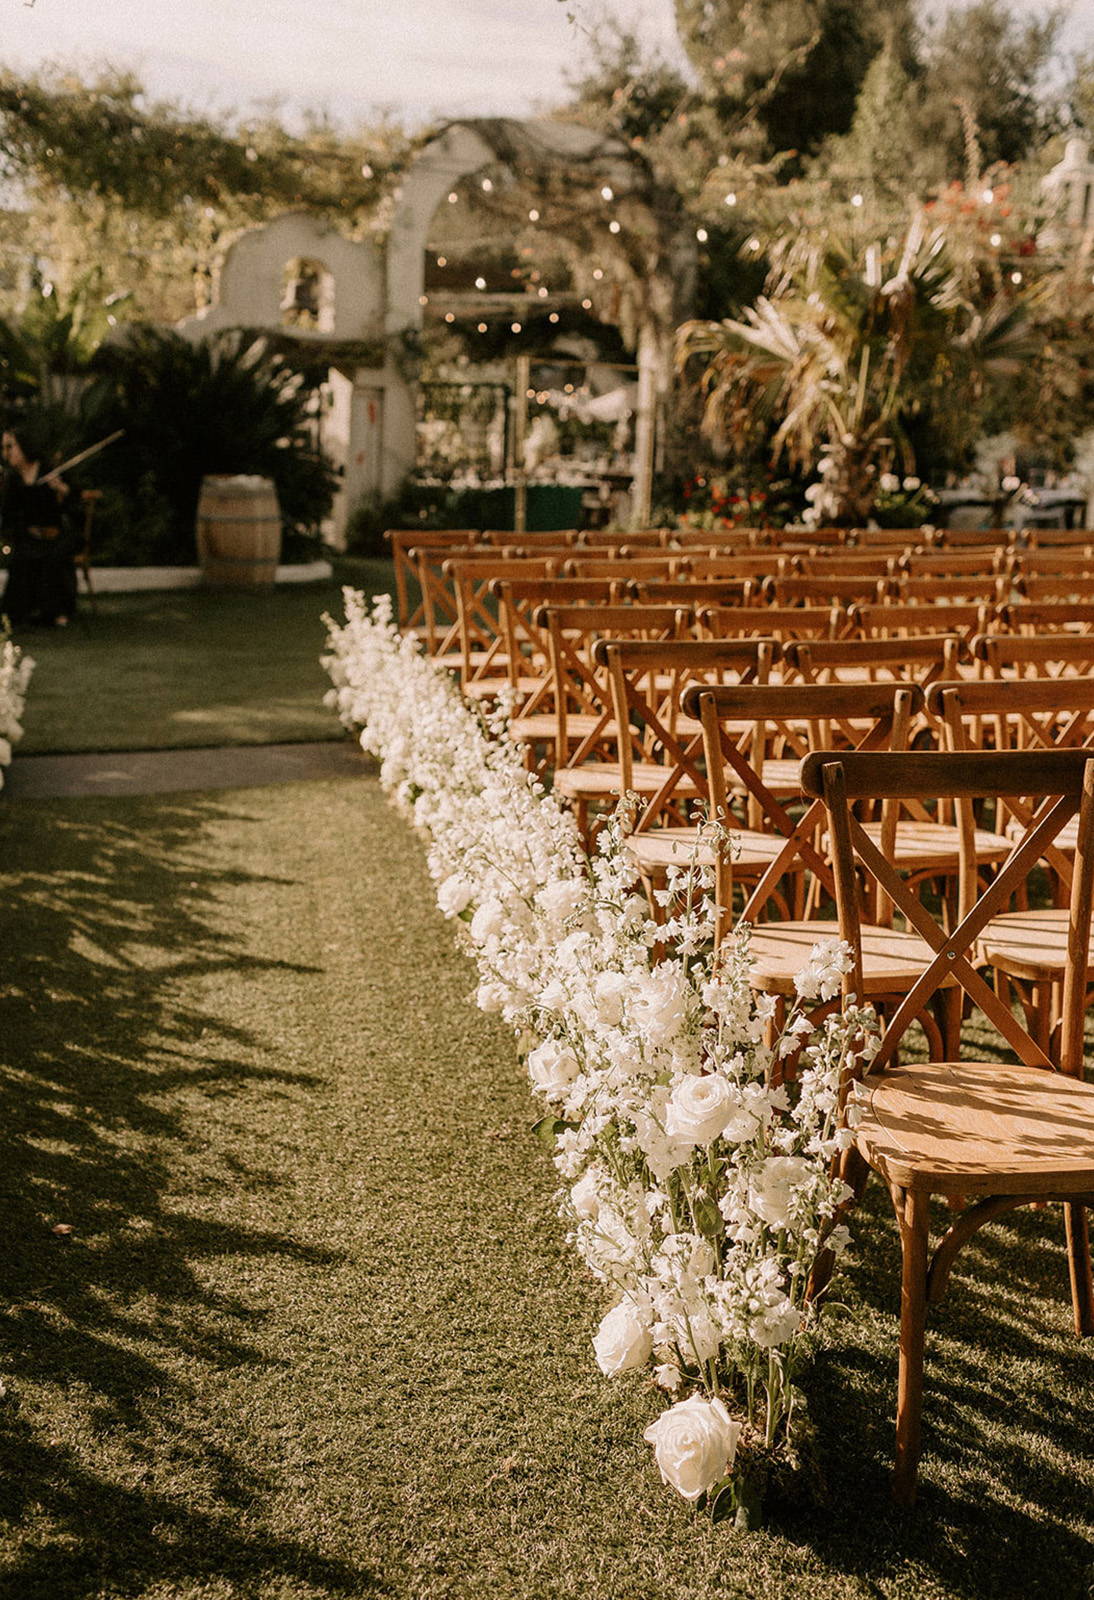 Chairs at wedding ceremony